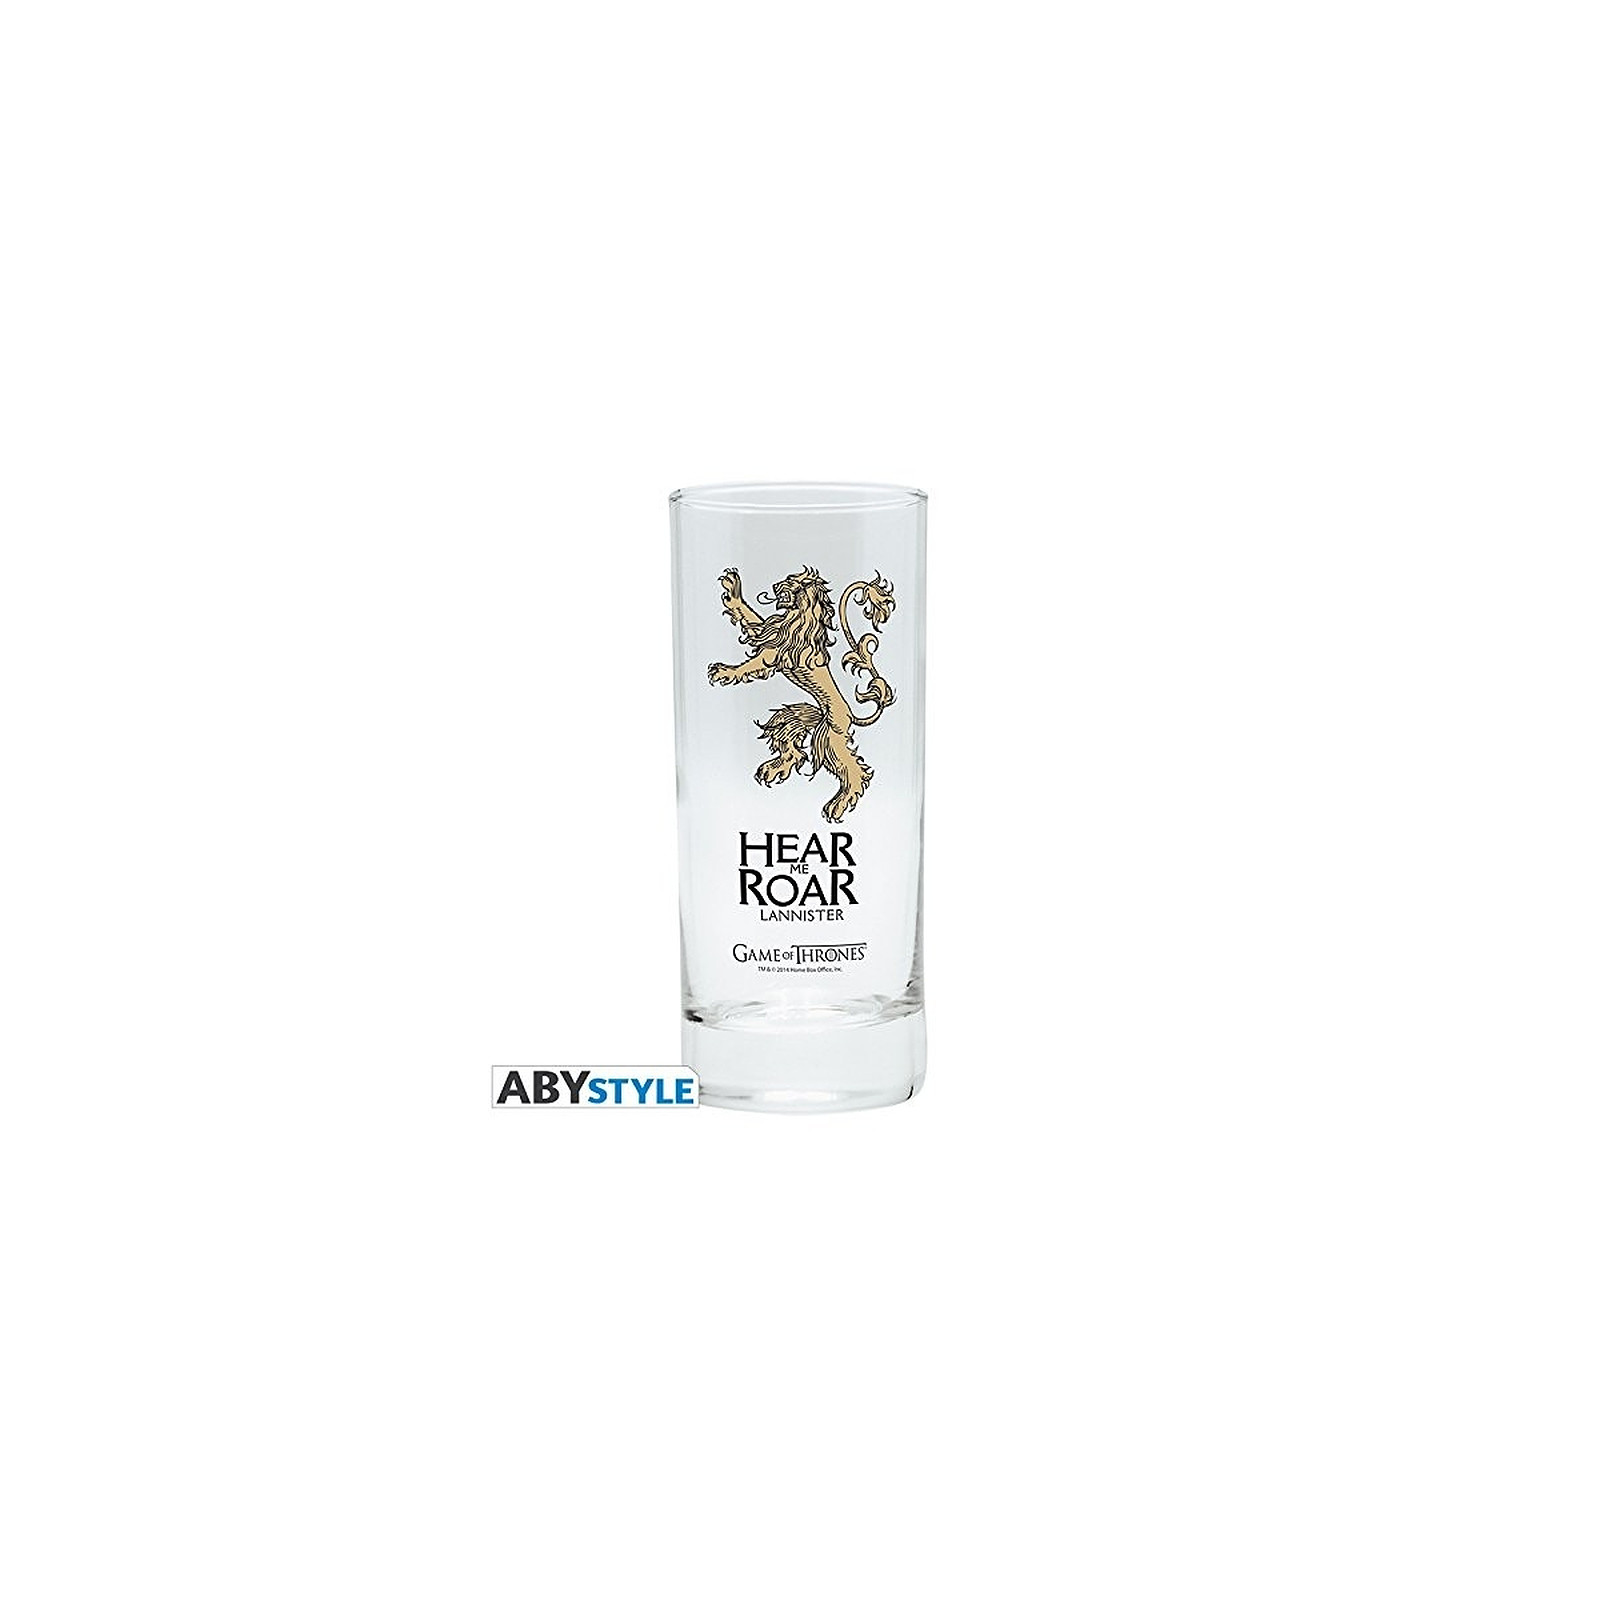 GAME OF THRONES - Verre Lannister - Vaisselle Abystyle